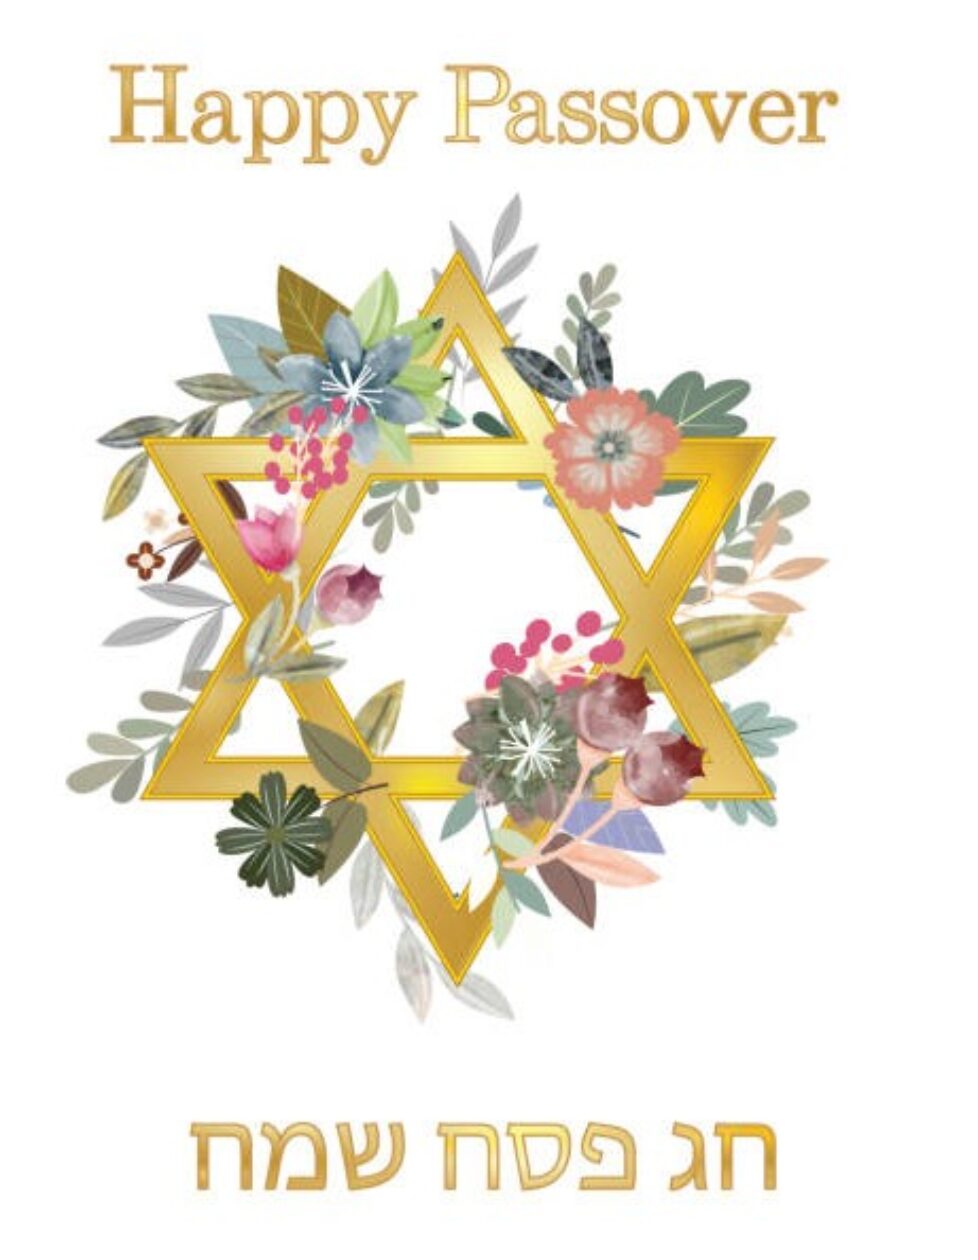 jewish-star-of-david-with-flowers-vector-illustration-background-greetng-card-concept-for